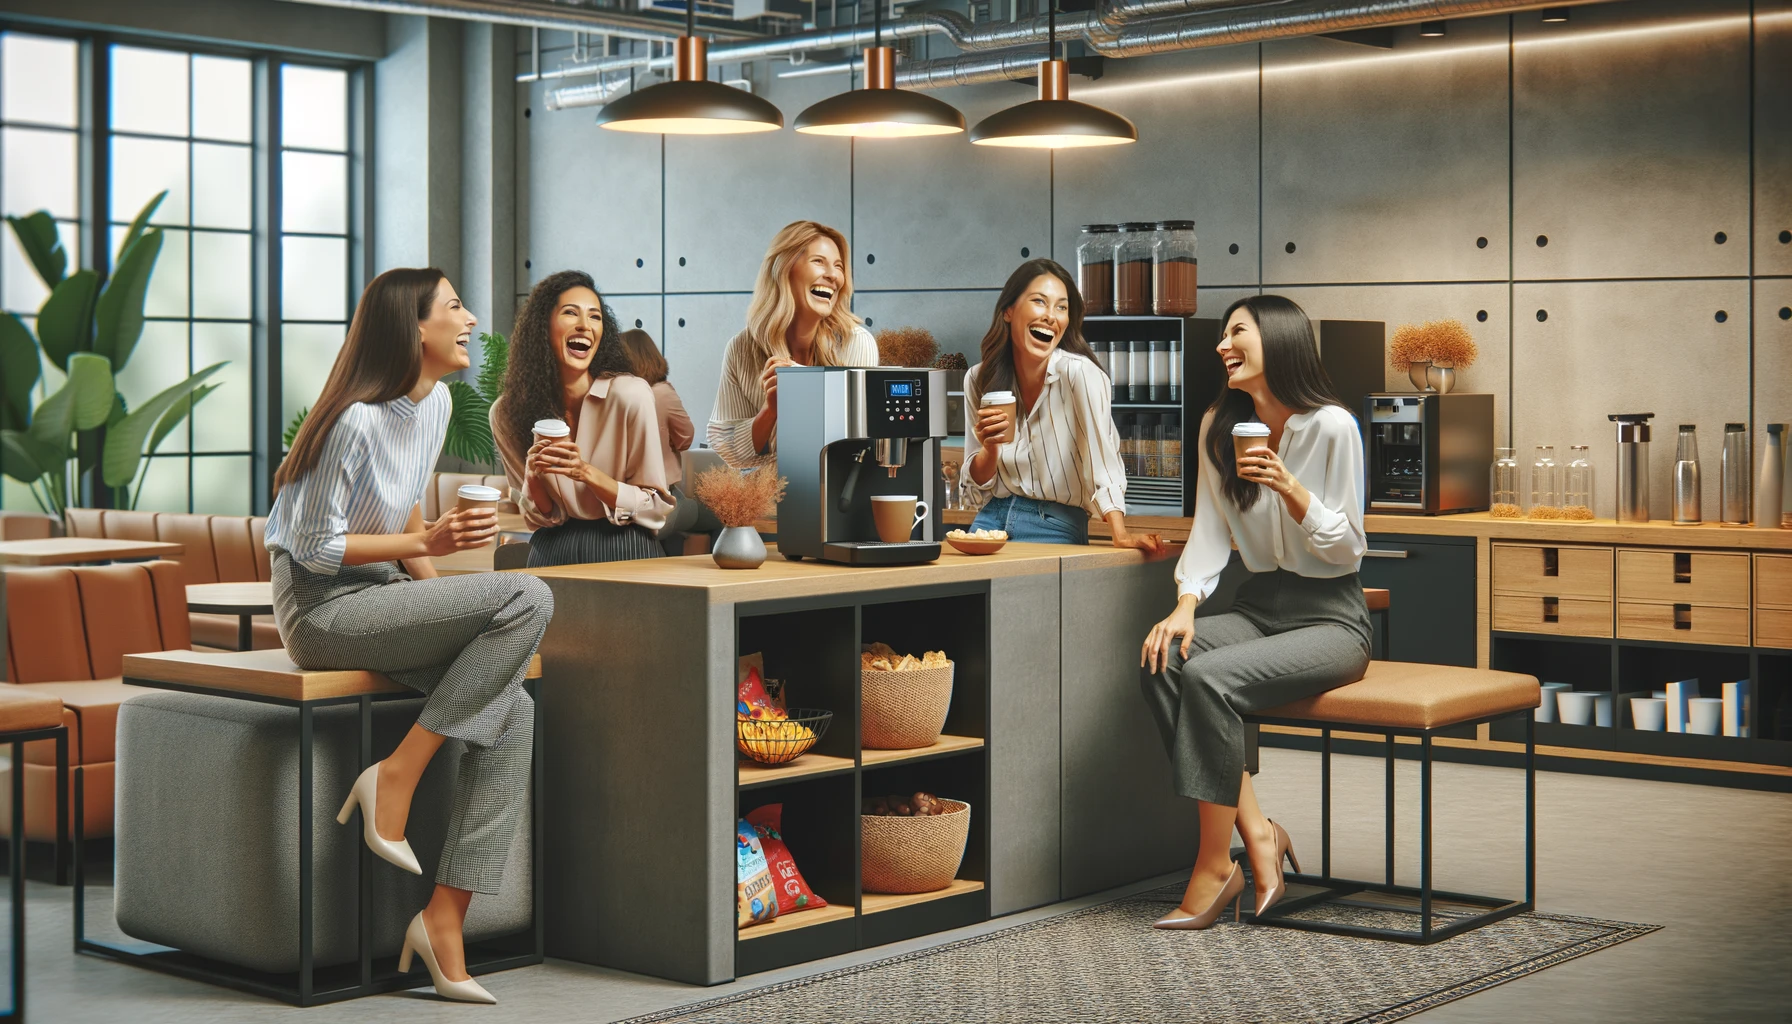 Dall·e 2024 05 30 03.57.01 A 16 9 Ultra Realistic Image Of A Group Of Female Employees Laughing And Getting Coffee In The Breakroom At Work. The Breakroom Has A Modern Design Wi